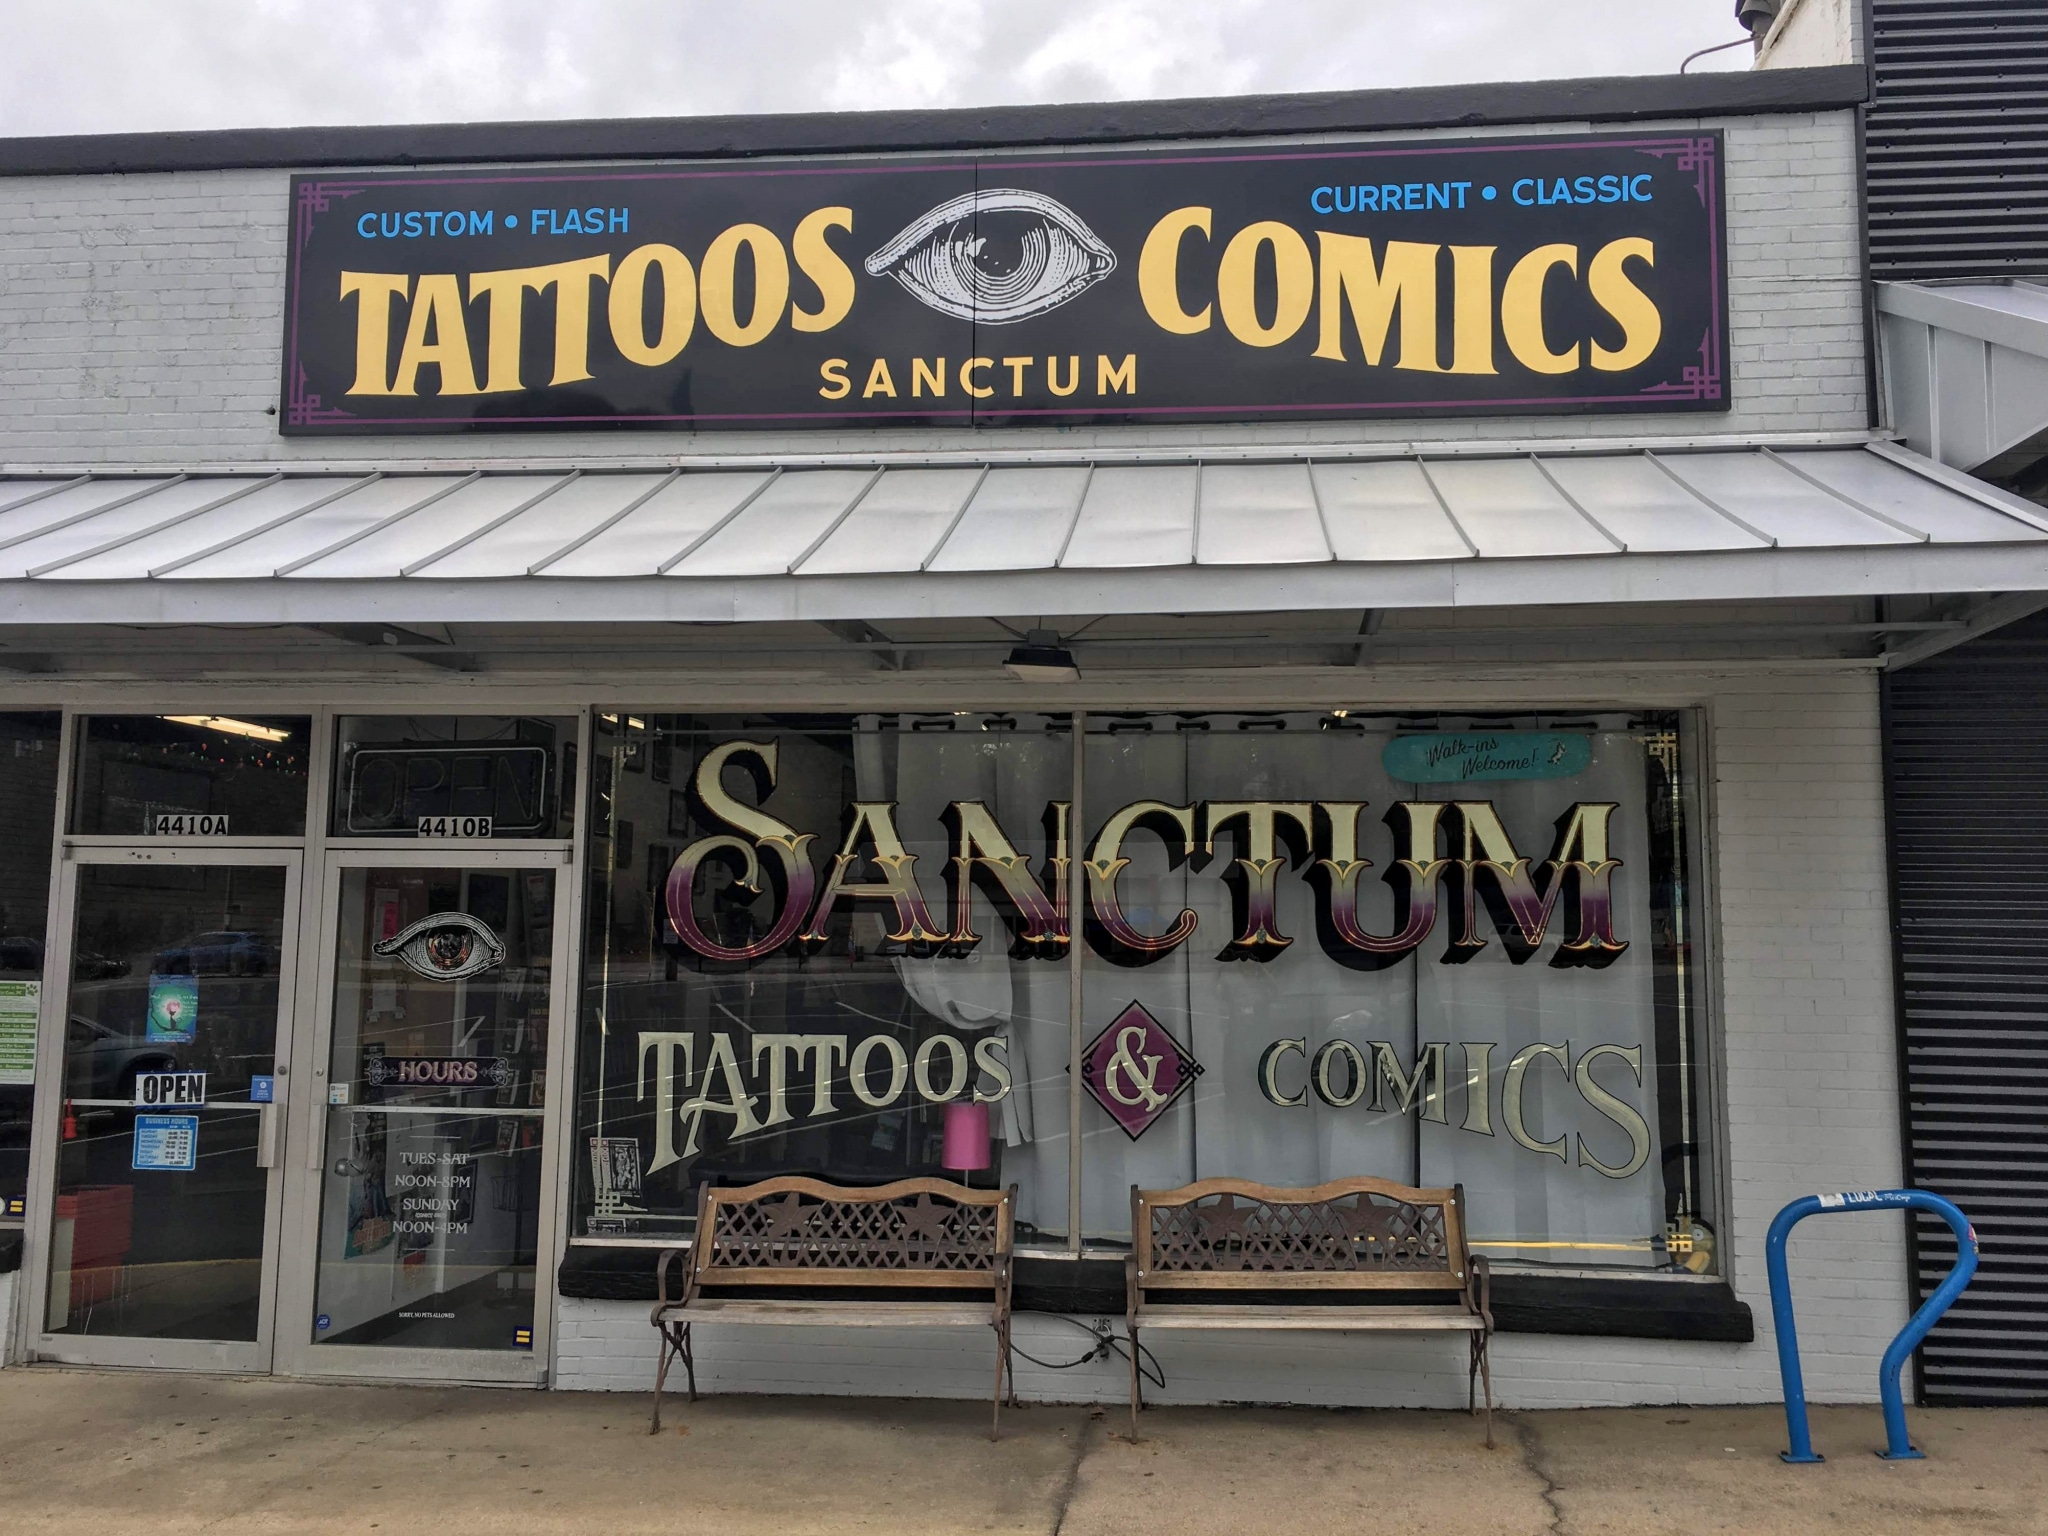 Sanctum Tattoos and Comics is one of the Birmingham comic book stores Bham Now visited to find treasures.